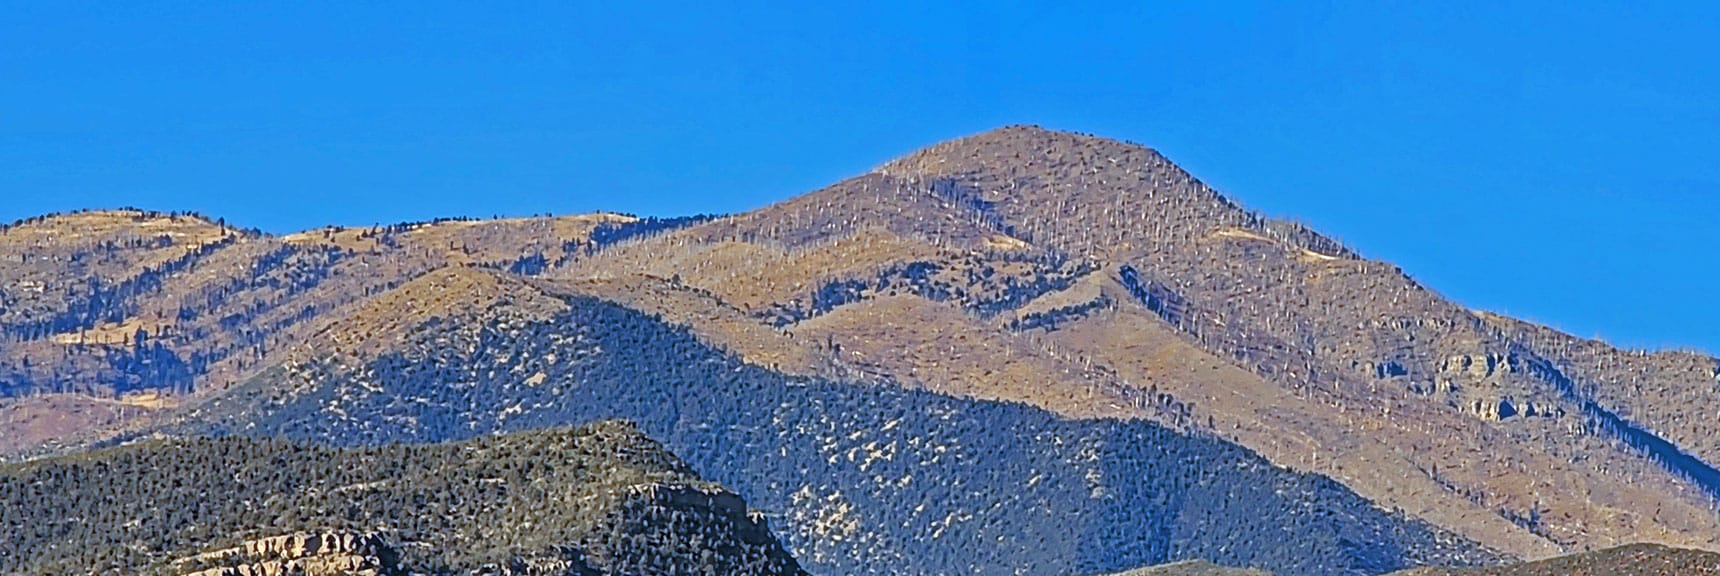 Large View of Griffith Peak, Burned in 2013 Carpenter Fire | Landmark Bluff Summit | Lovell Canyon, Nevada